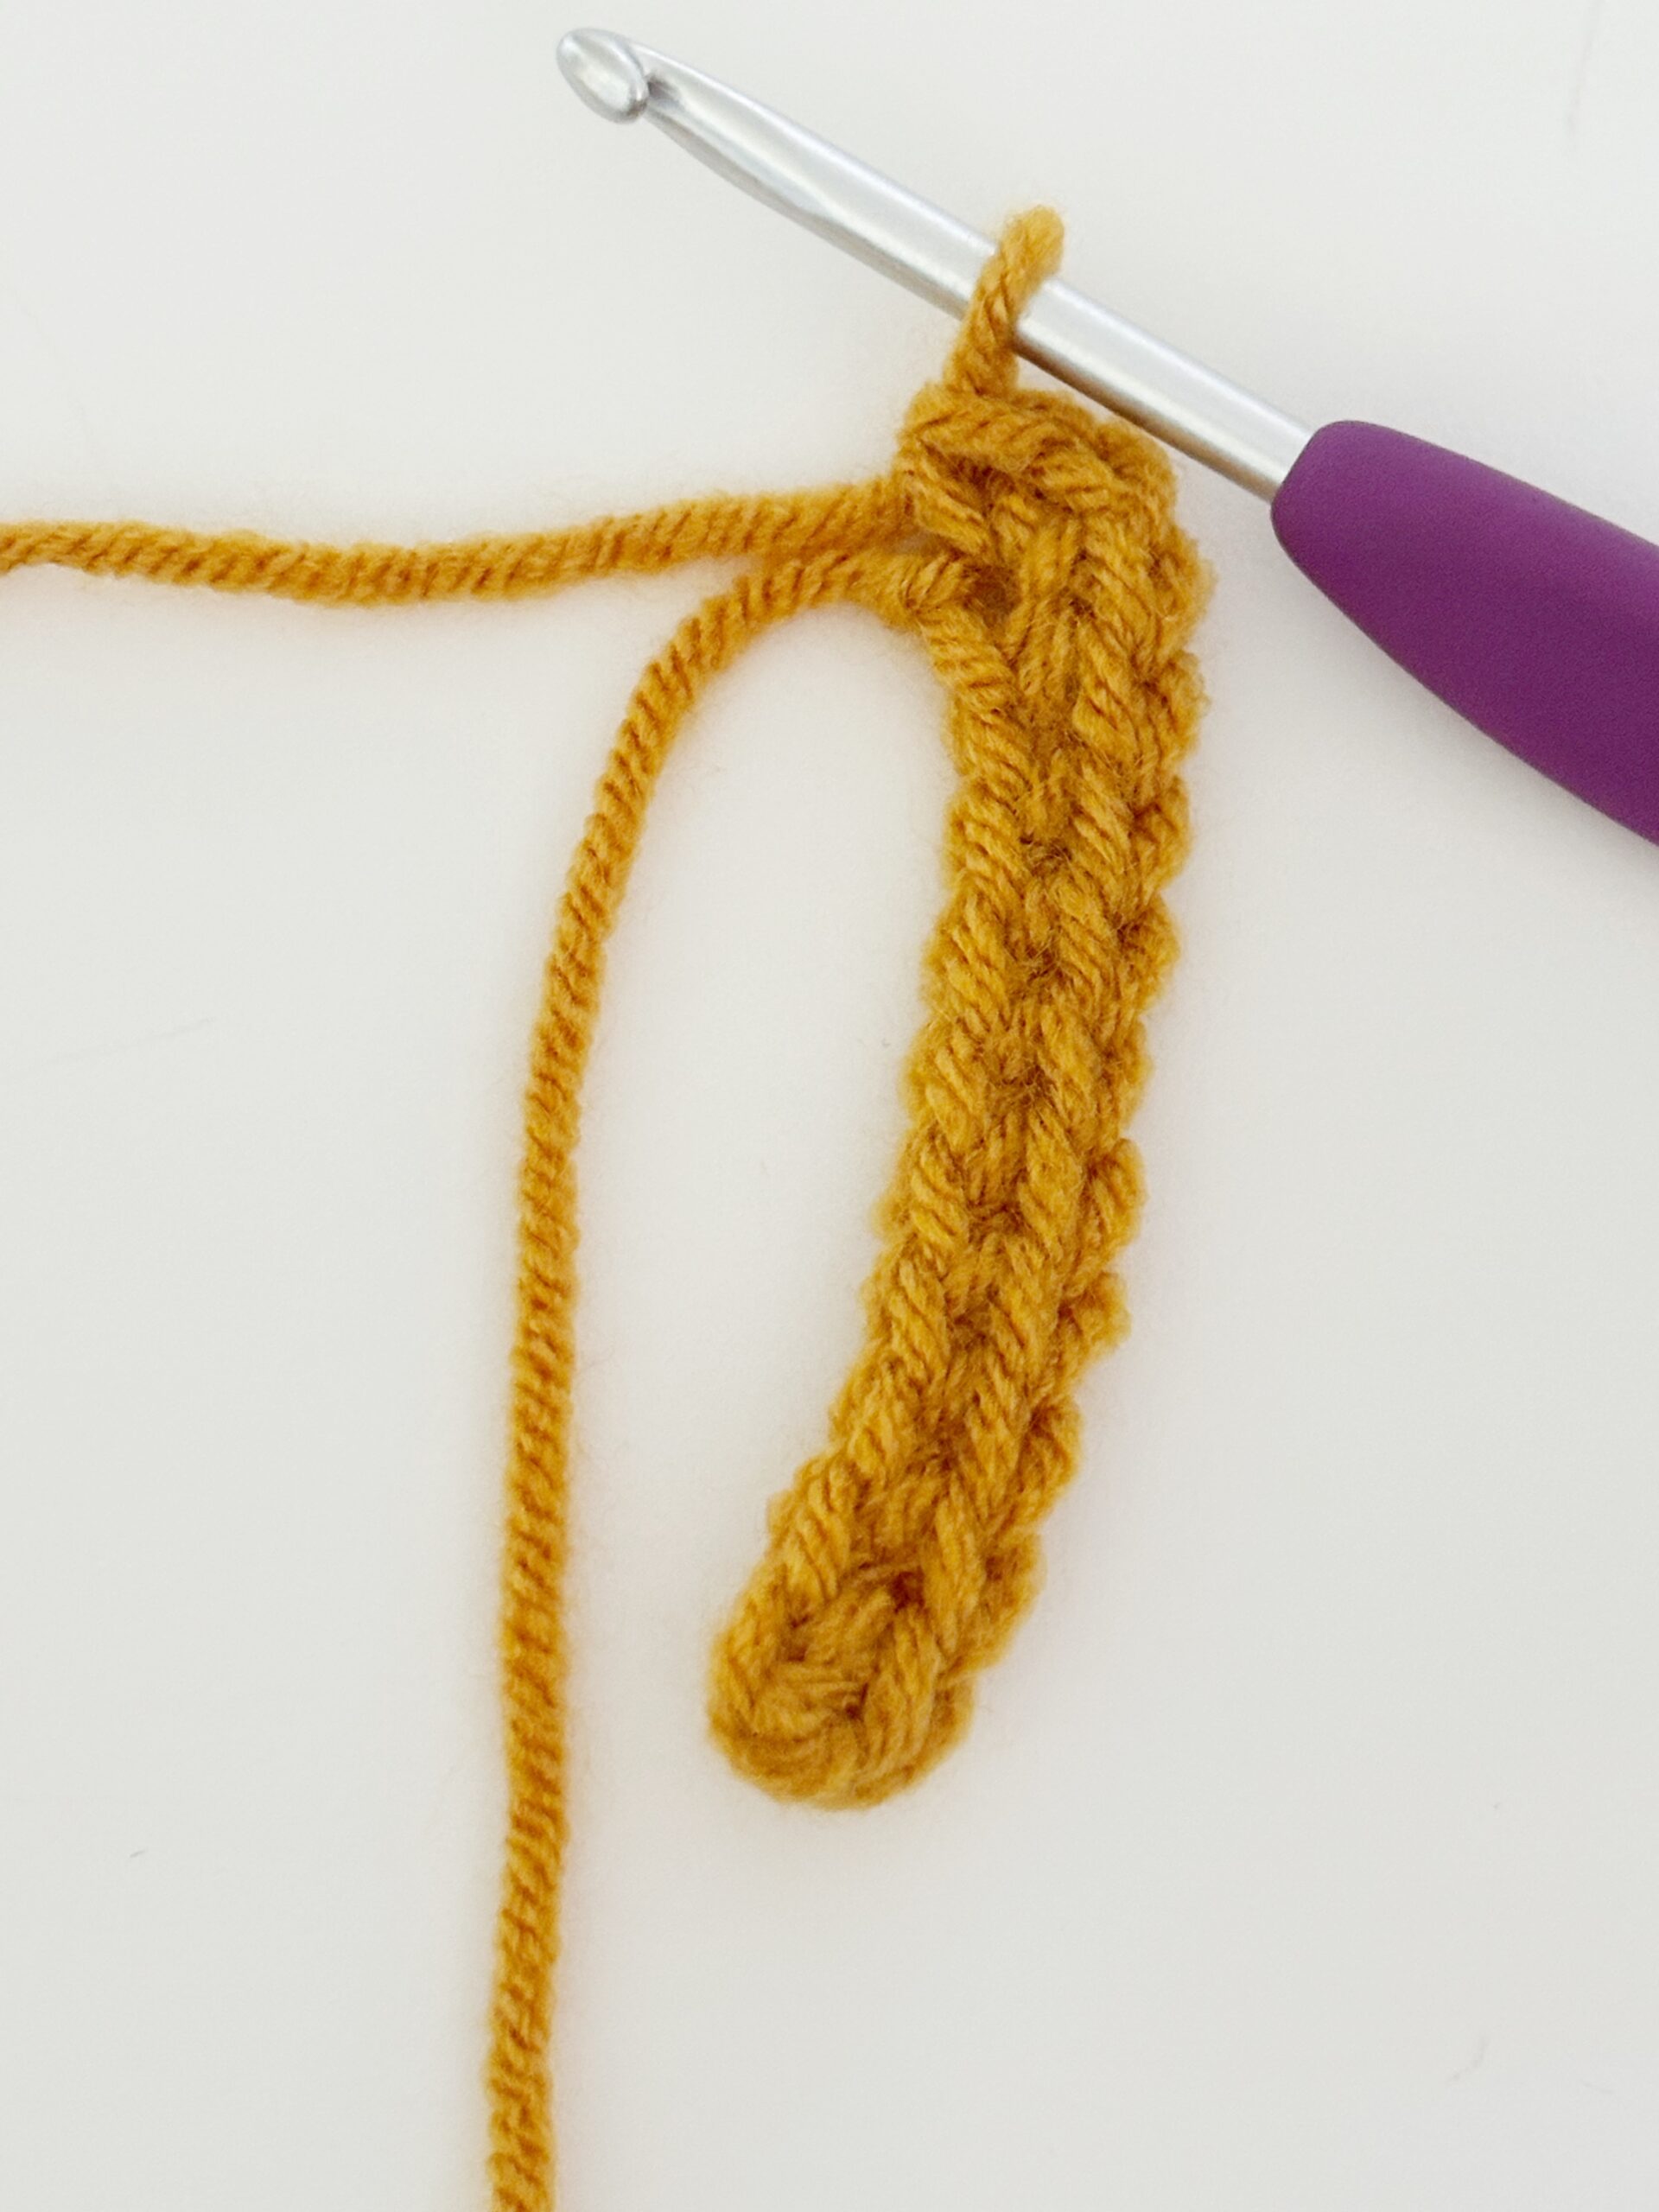 Working in an Oval Shape on the Other Side of the Chain for Amigurumi Corner Stitches